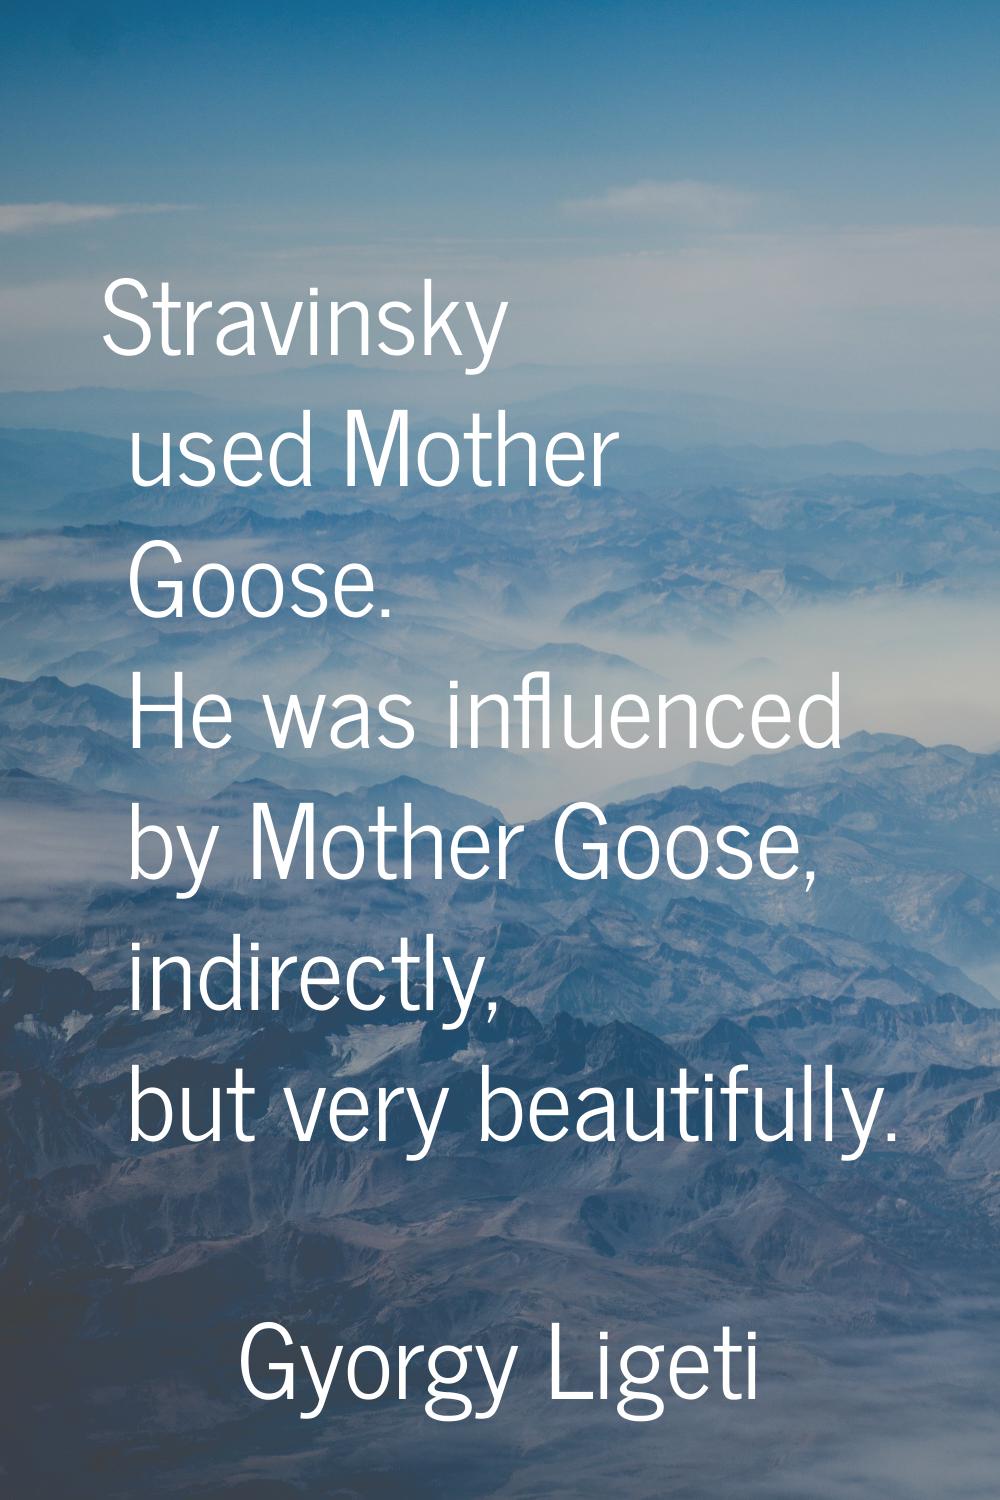 Stravinsky used Mother Goose. He was influenced by Mother Goose, indirectly, but very beautifully.